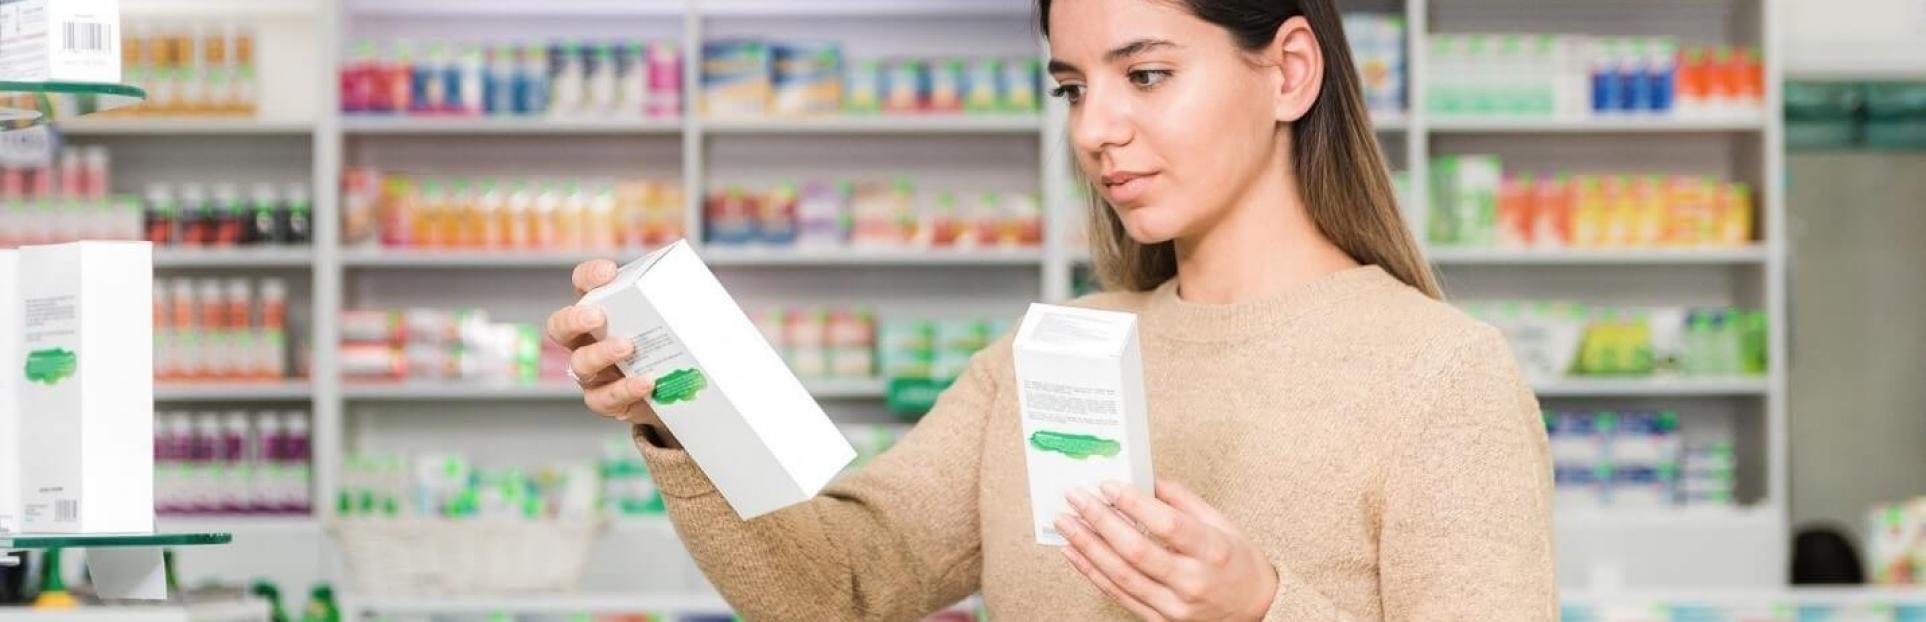 Woman looking at supplements in store